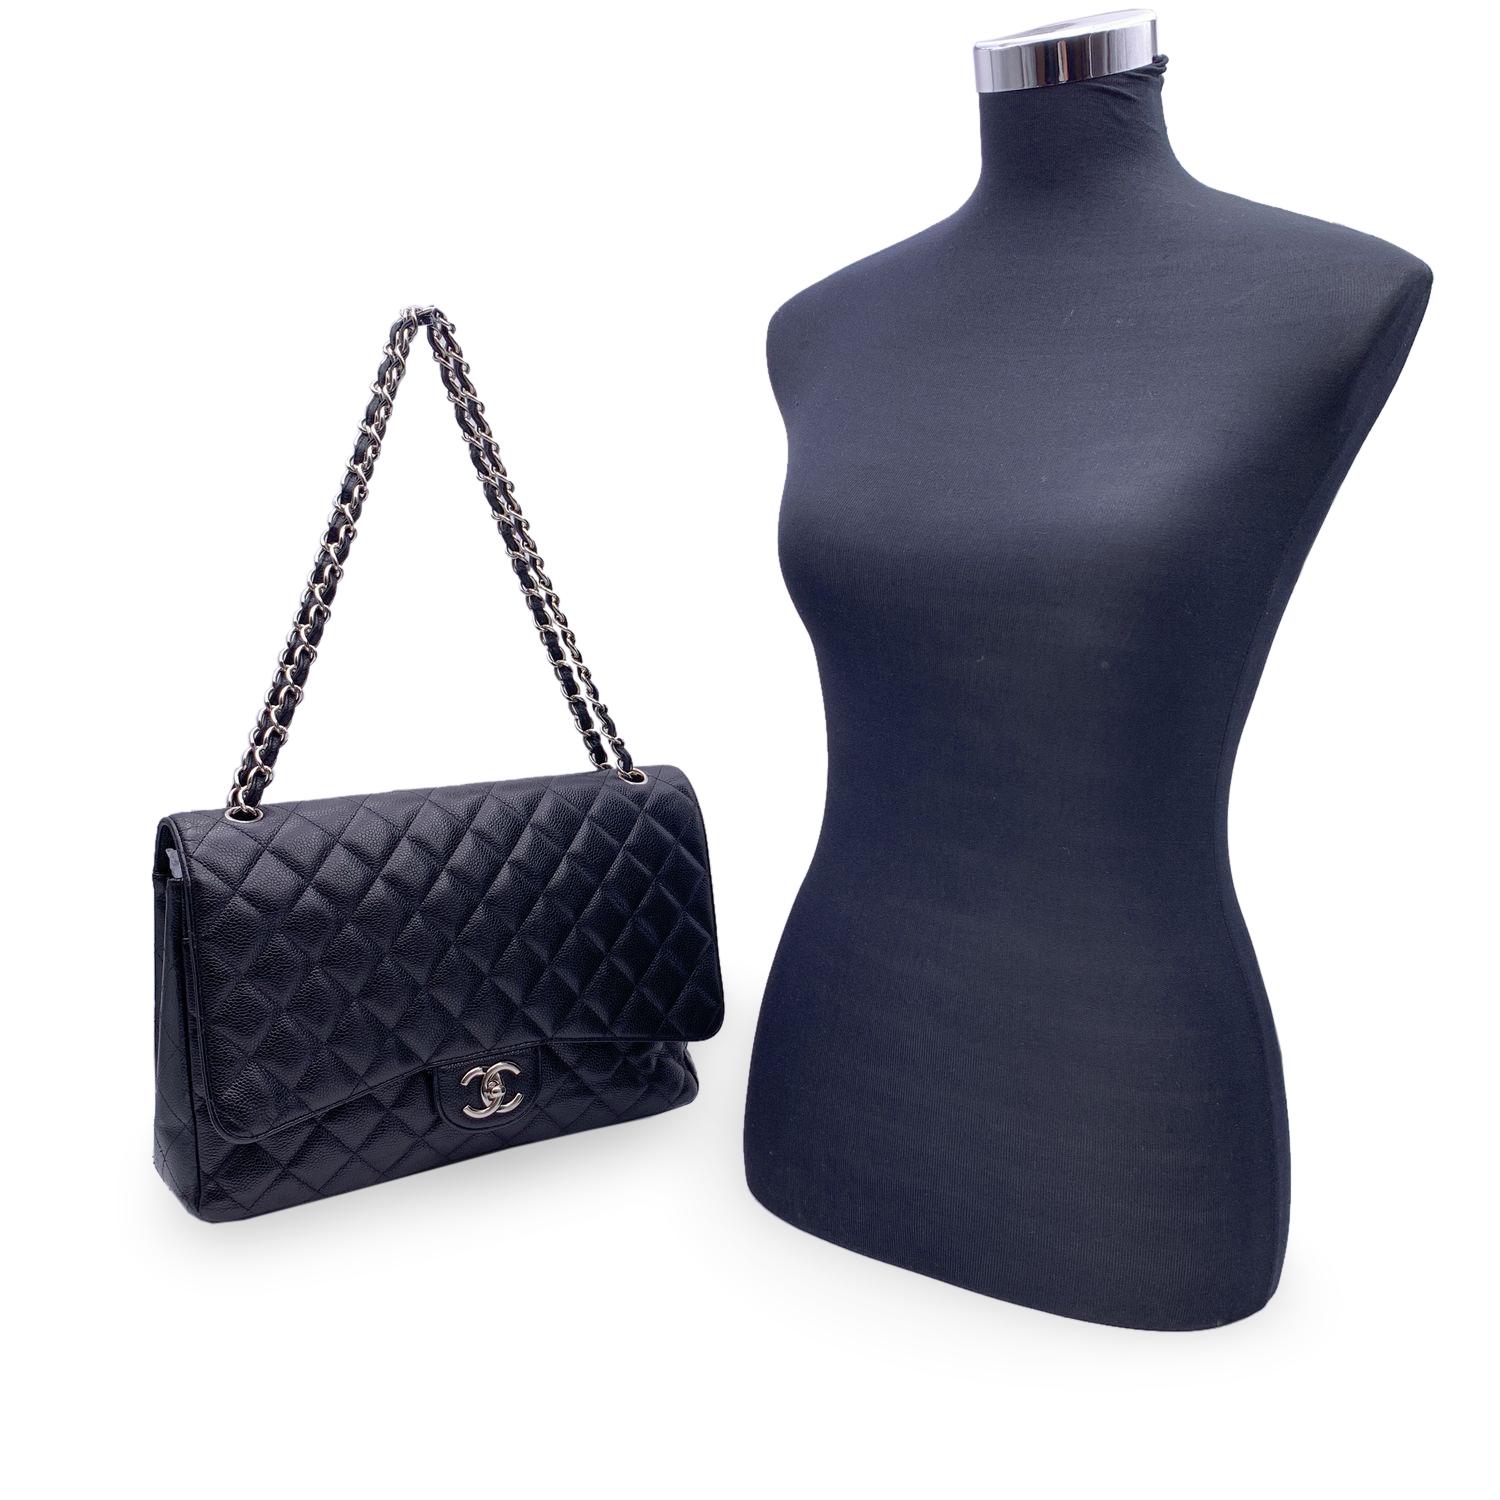 This beautiful Bag will come with a Certificate of Authenticity provided by Entrupy. The certificate will be provided at no further cost

Chanel 'Maxi' Timeless Classic Quilted Double Flap Maxi Timeless 2.55 Bag. Black quilted caviar leather. Silver